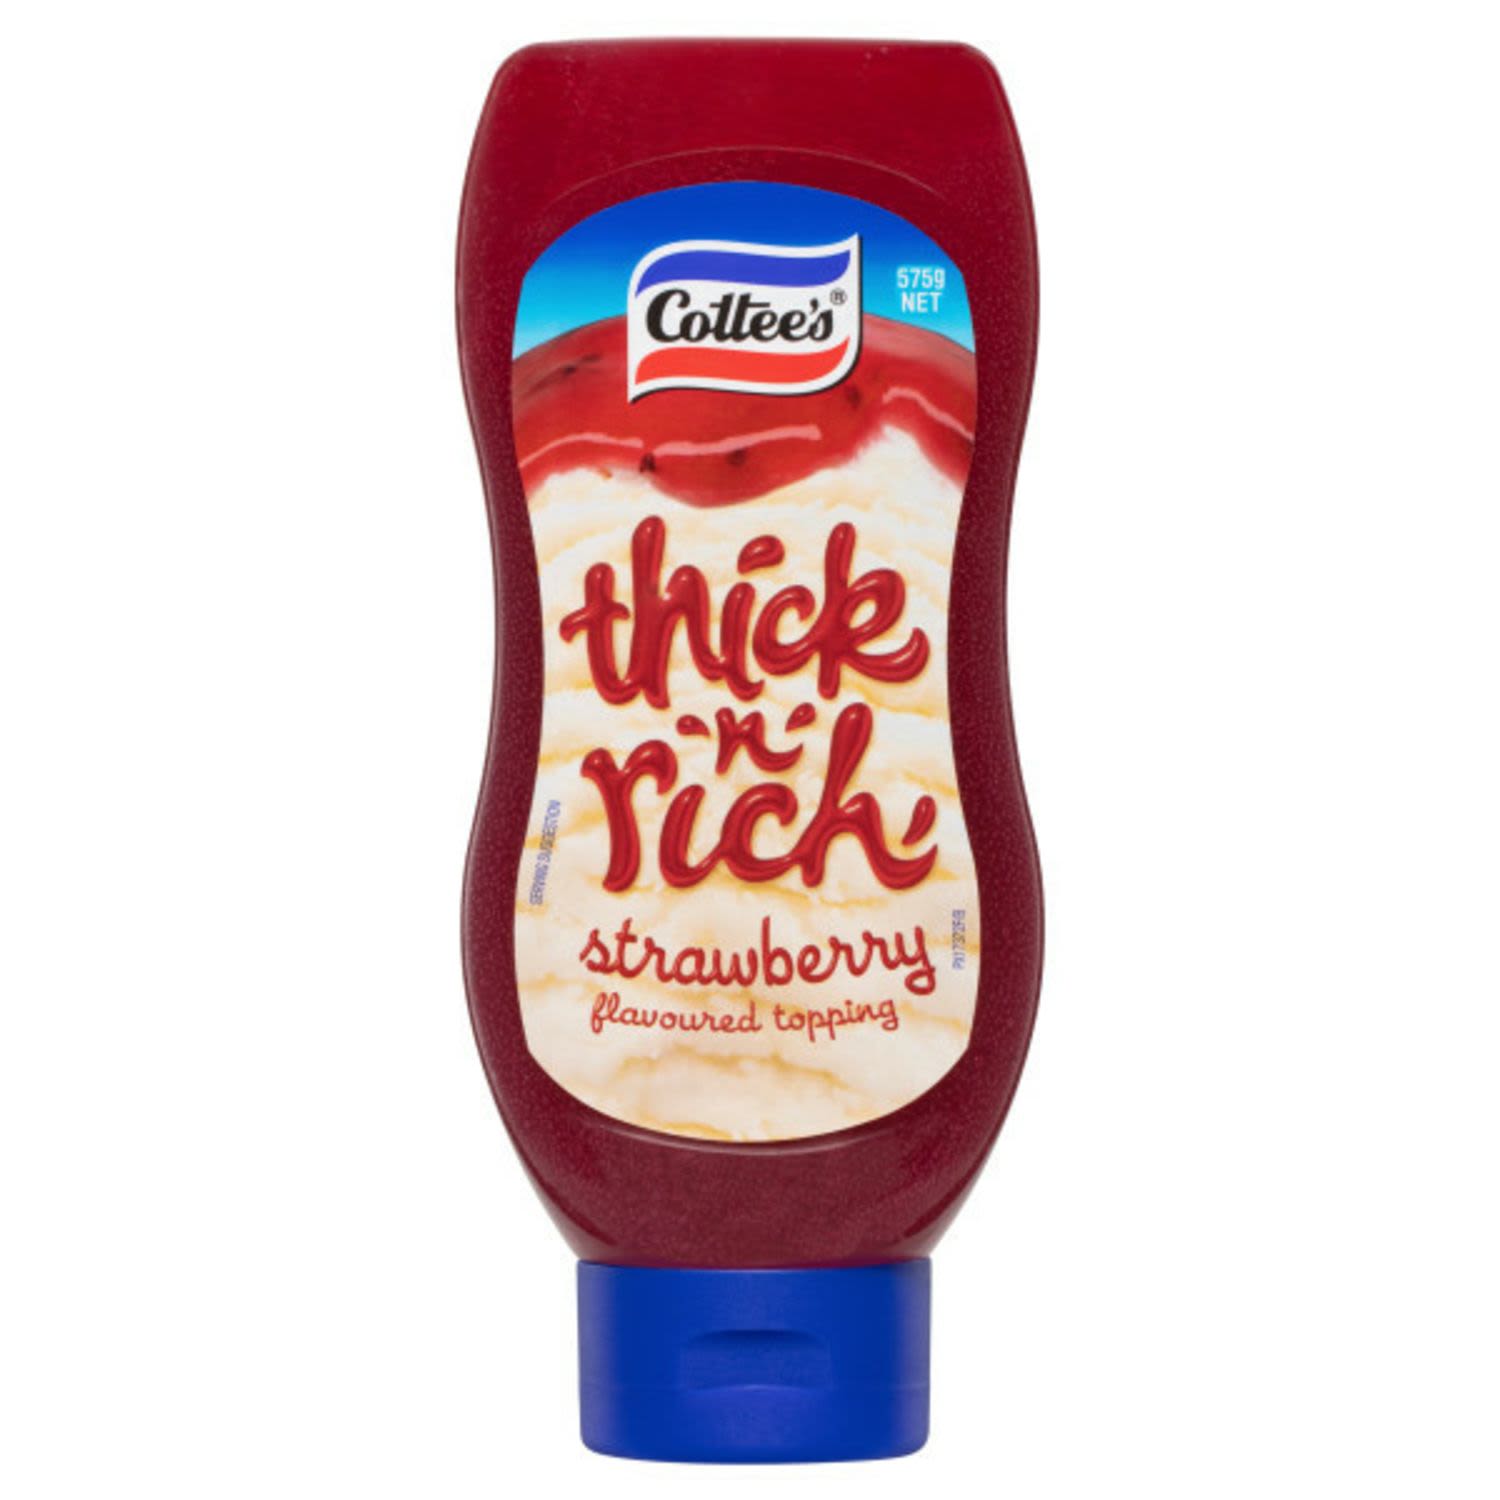 Cottee's Thick 'n' Rich Strawberry Flavoured Topping, 575 Gram